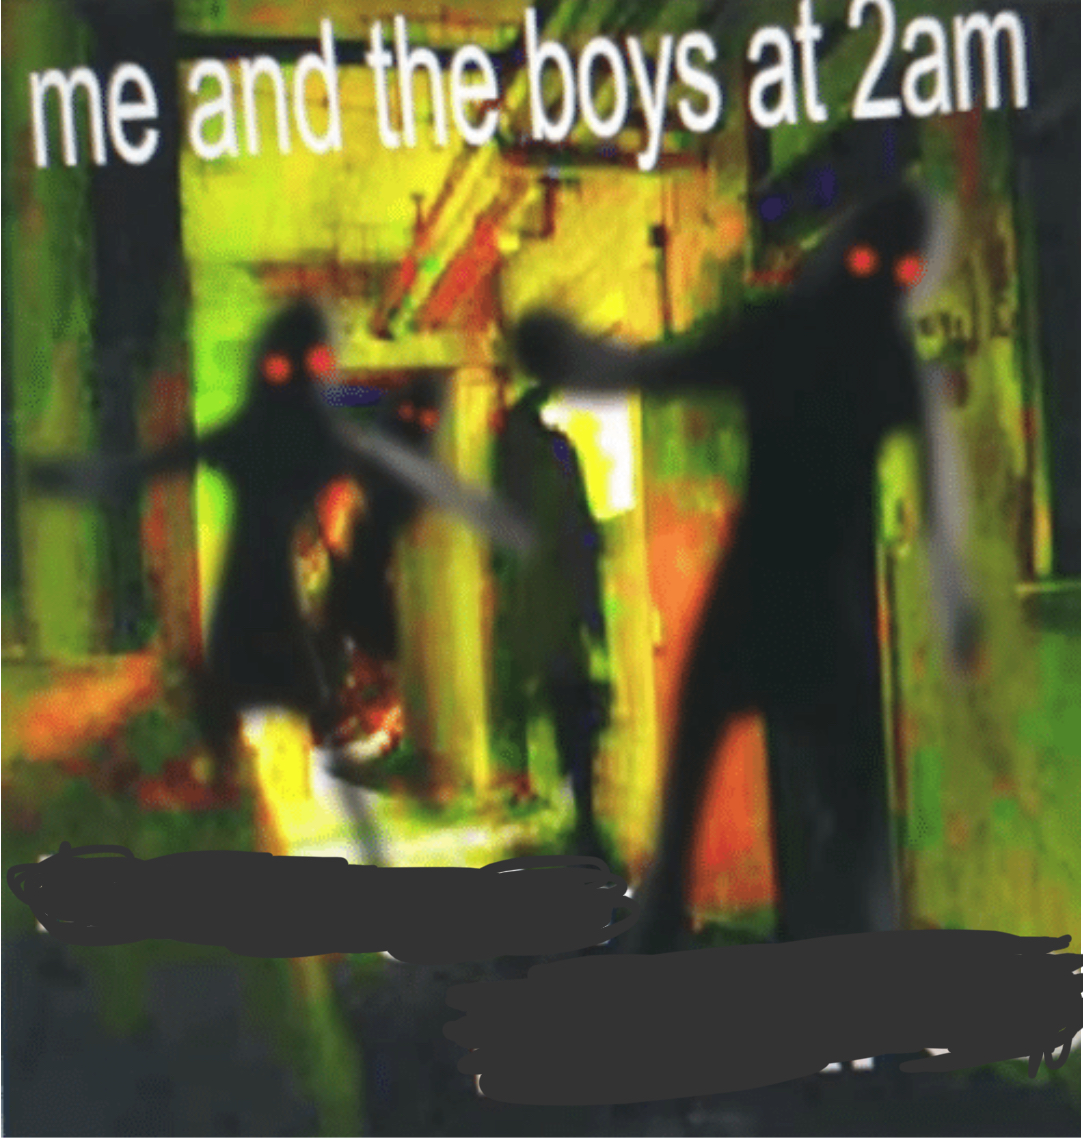 Me and the boy at 2am, X Blank Meme Template